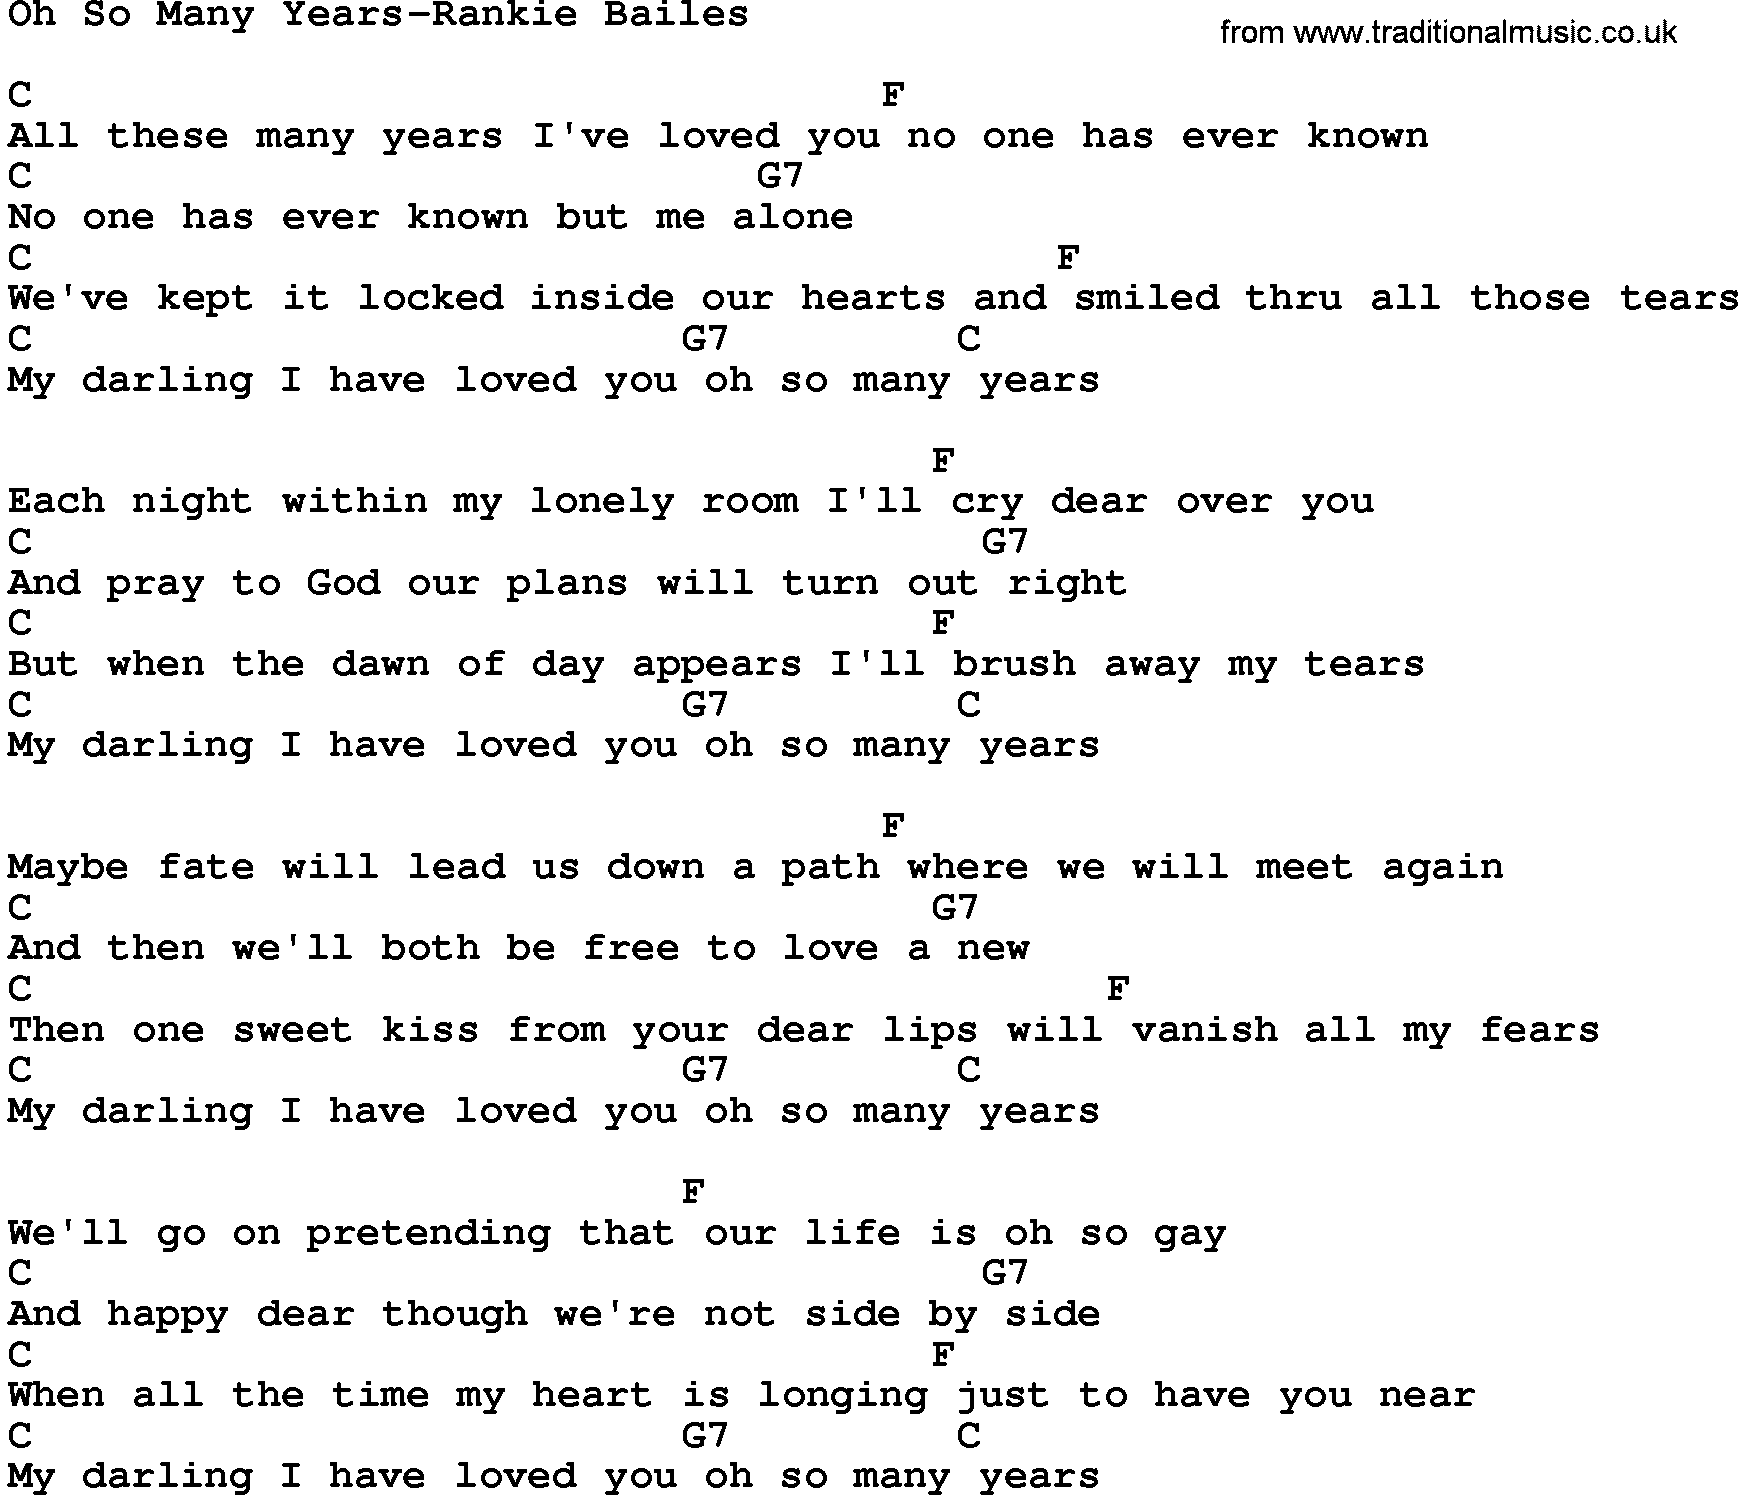 Country music song: Oh So Many Years-Rankie Bailes lyrics and chords